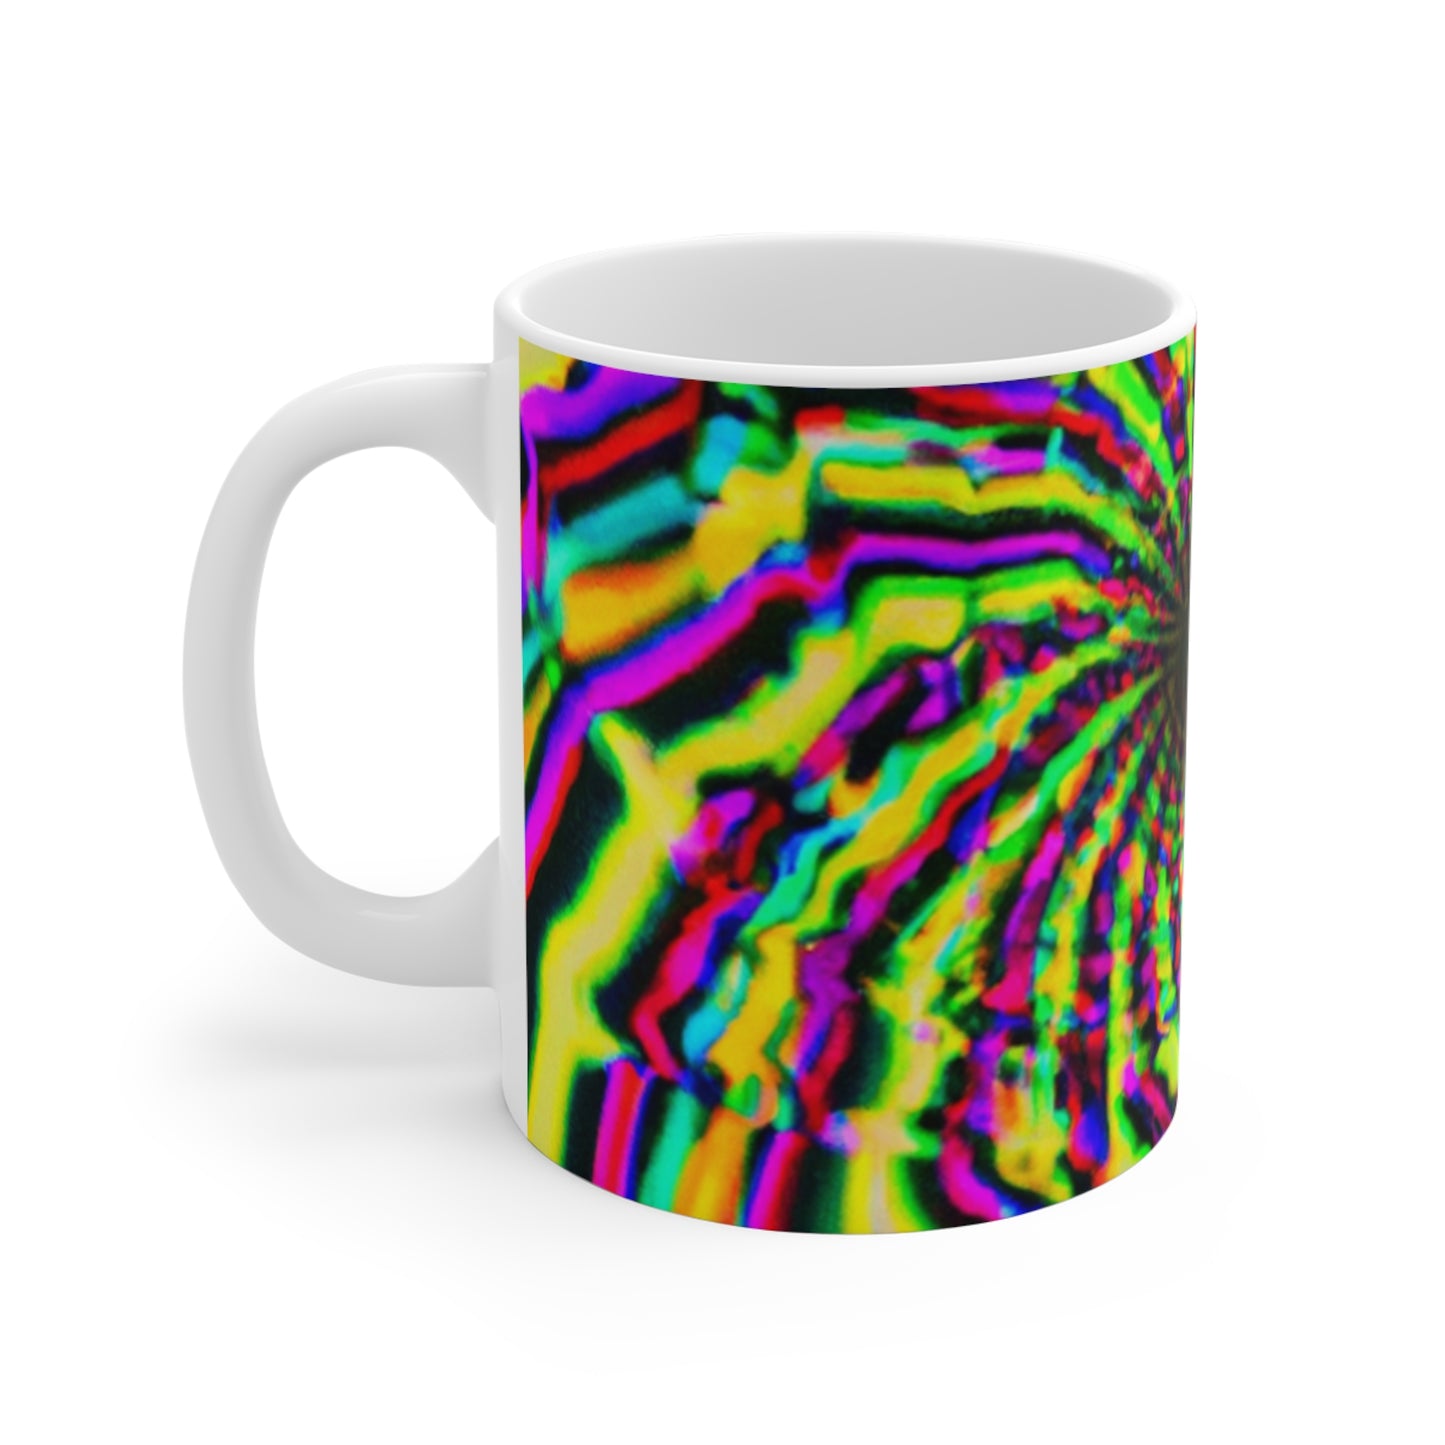 Milly's Mocha Brews - Psychedelic Coffee Cup Mug 11 Ounce